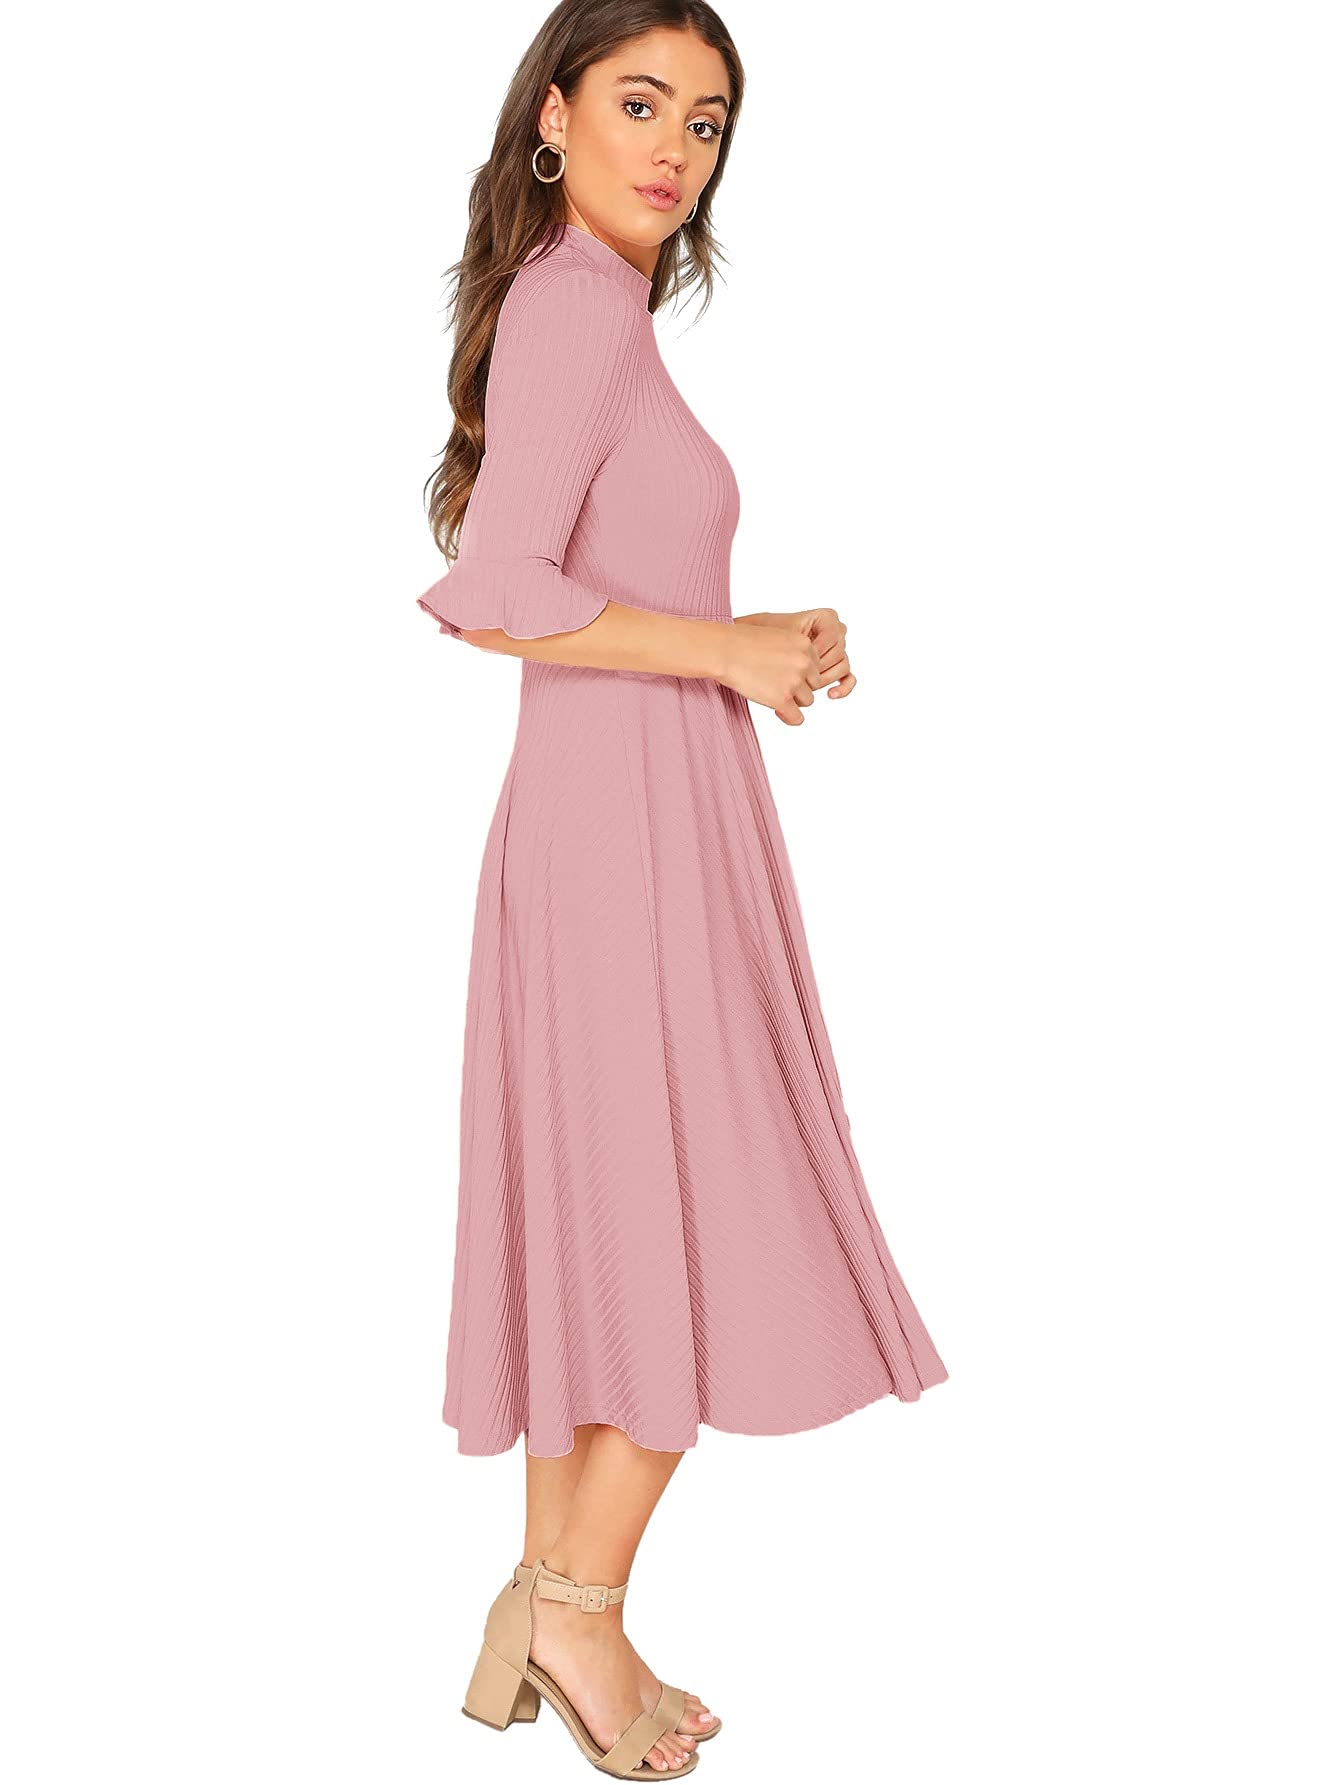 Verdusa Women's Elegant Ribbed Knit Bell Sleeve Fit and Flare Midi Dress